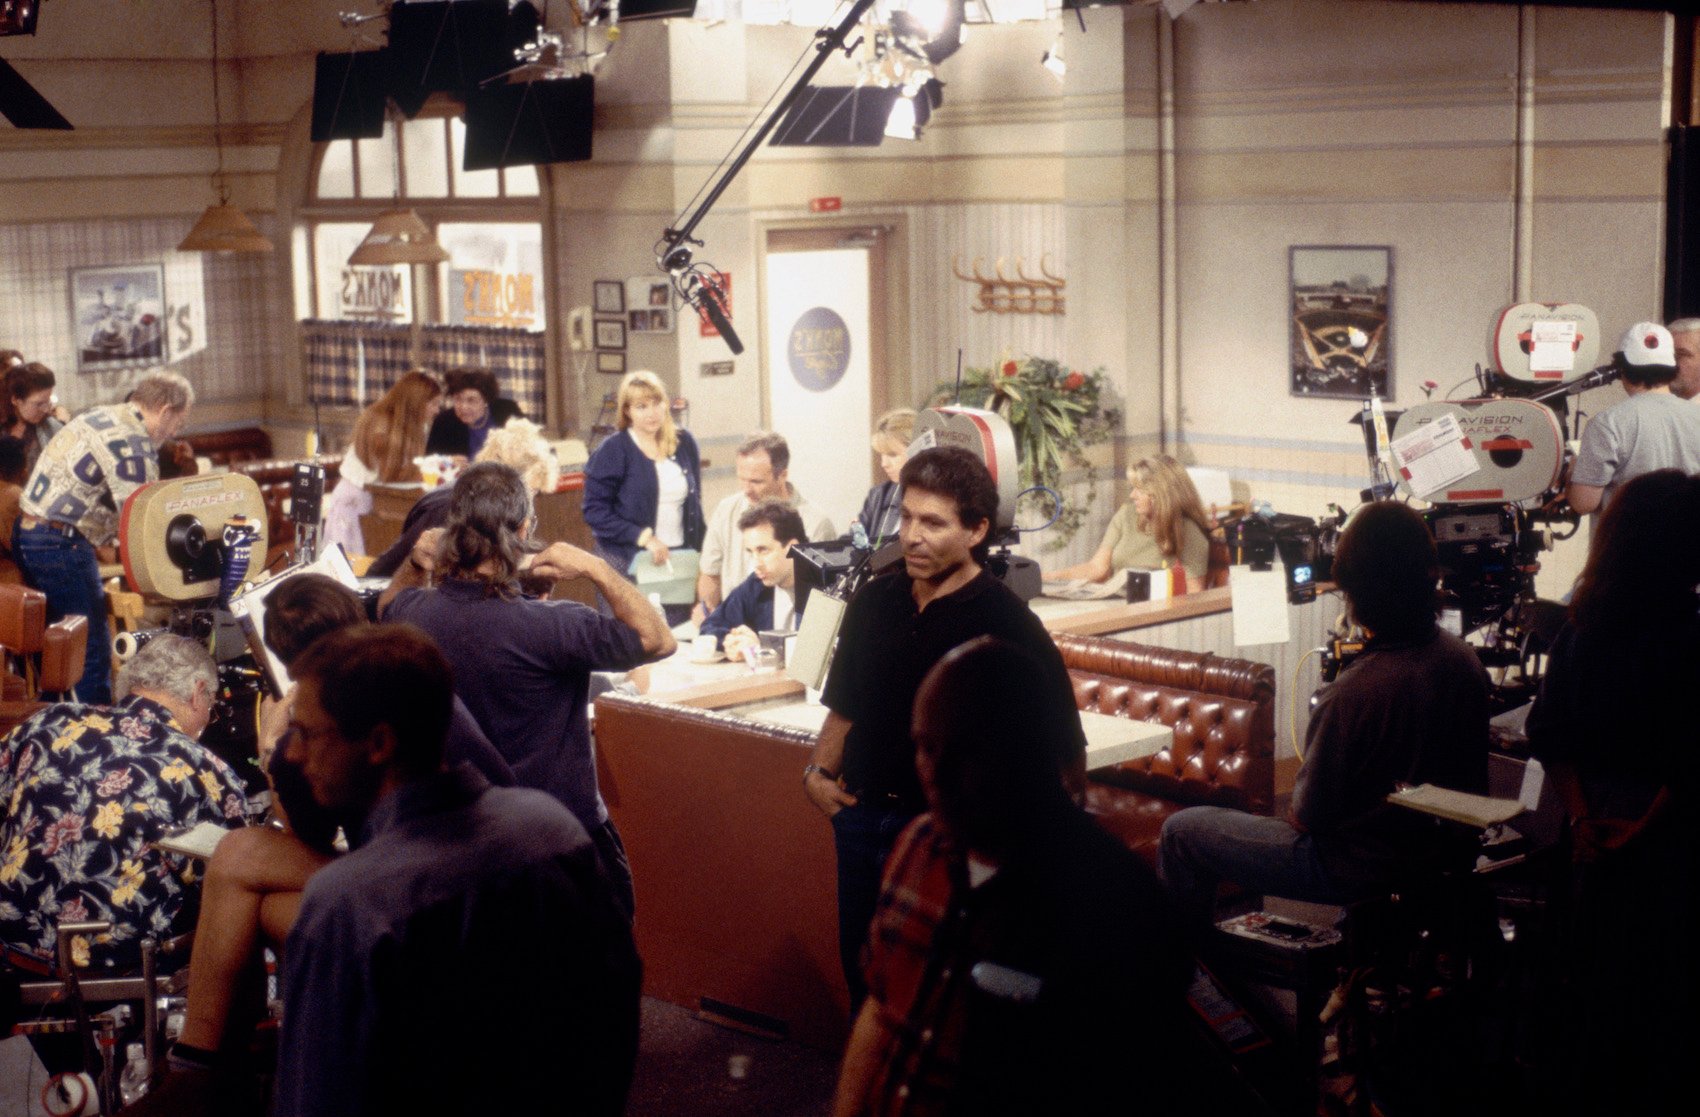 A scene from 'Seinfeld' being filmed at the fictional Monk's Cafe